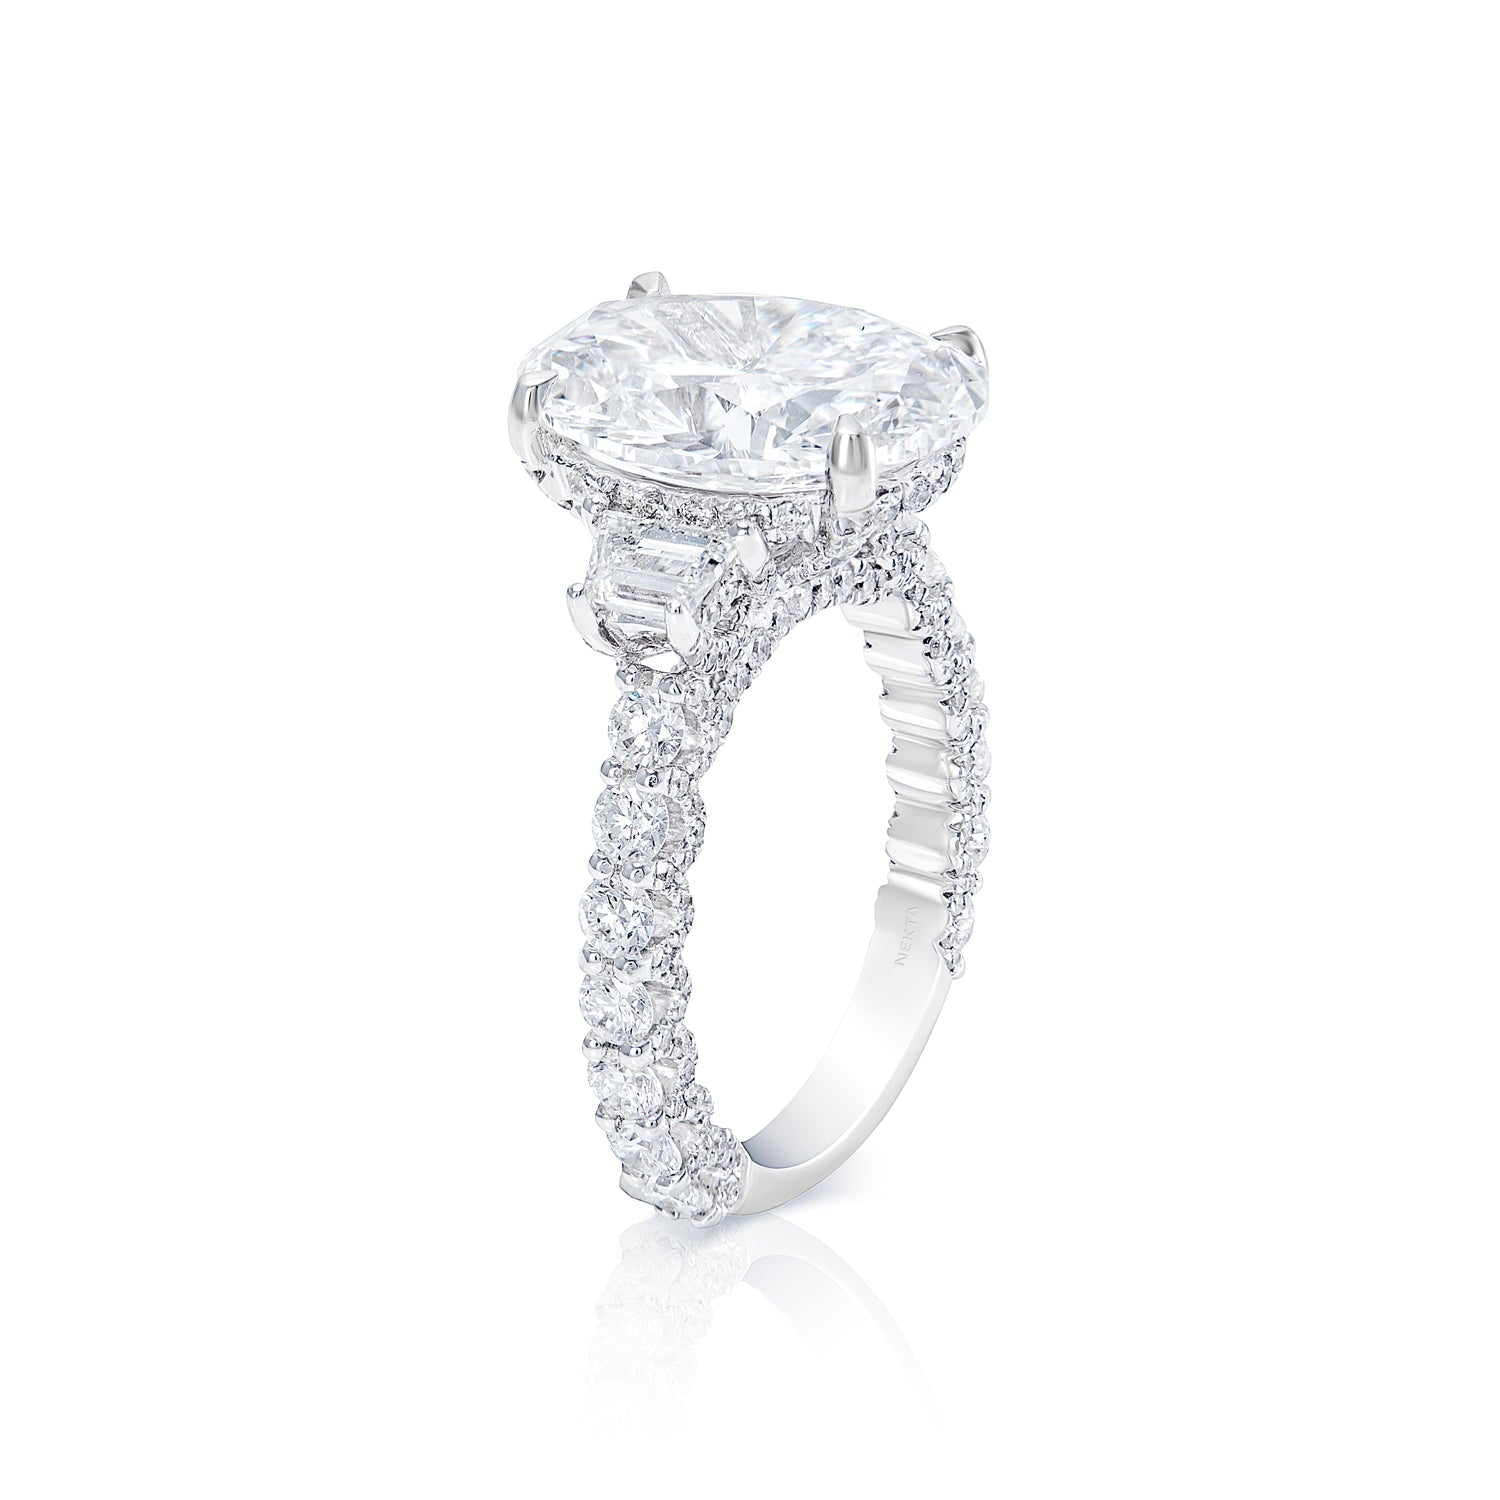 Josie 8 Carat Oval Cut Earth Mined VVS1 Diamond Engagement Ring in 18k White Gold. GIA Side View